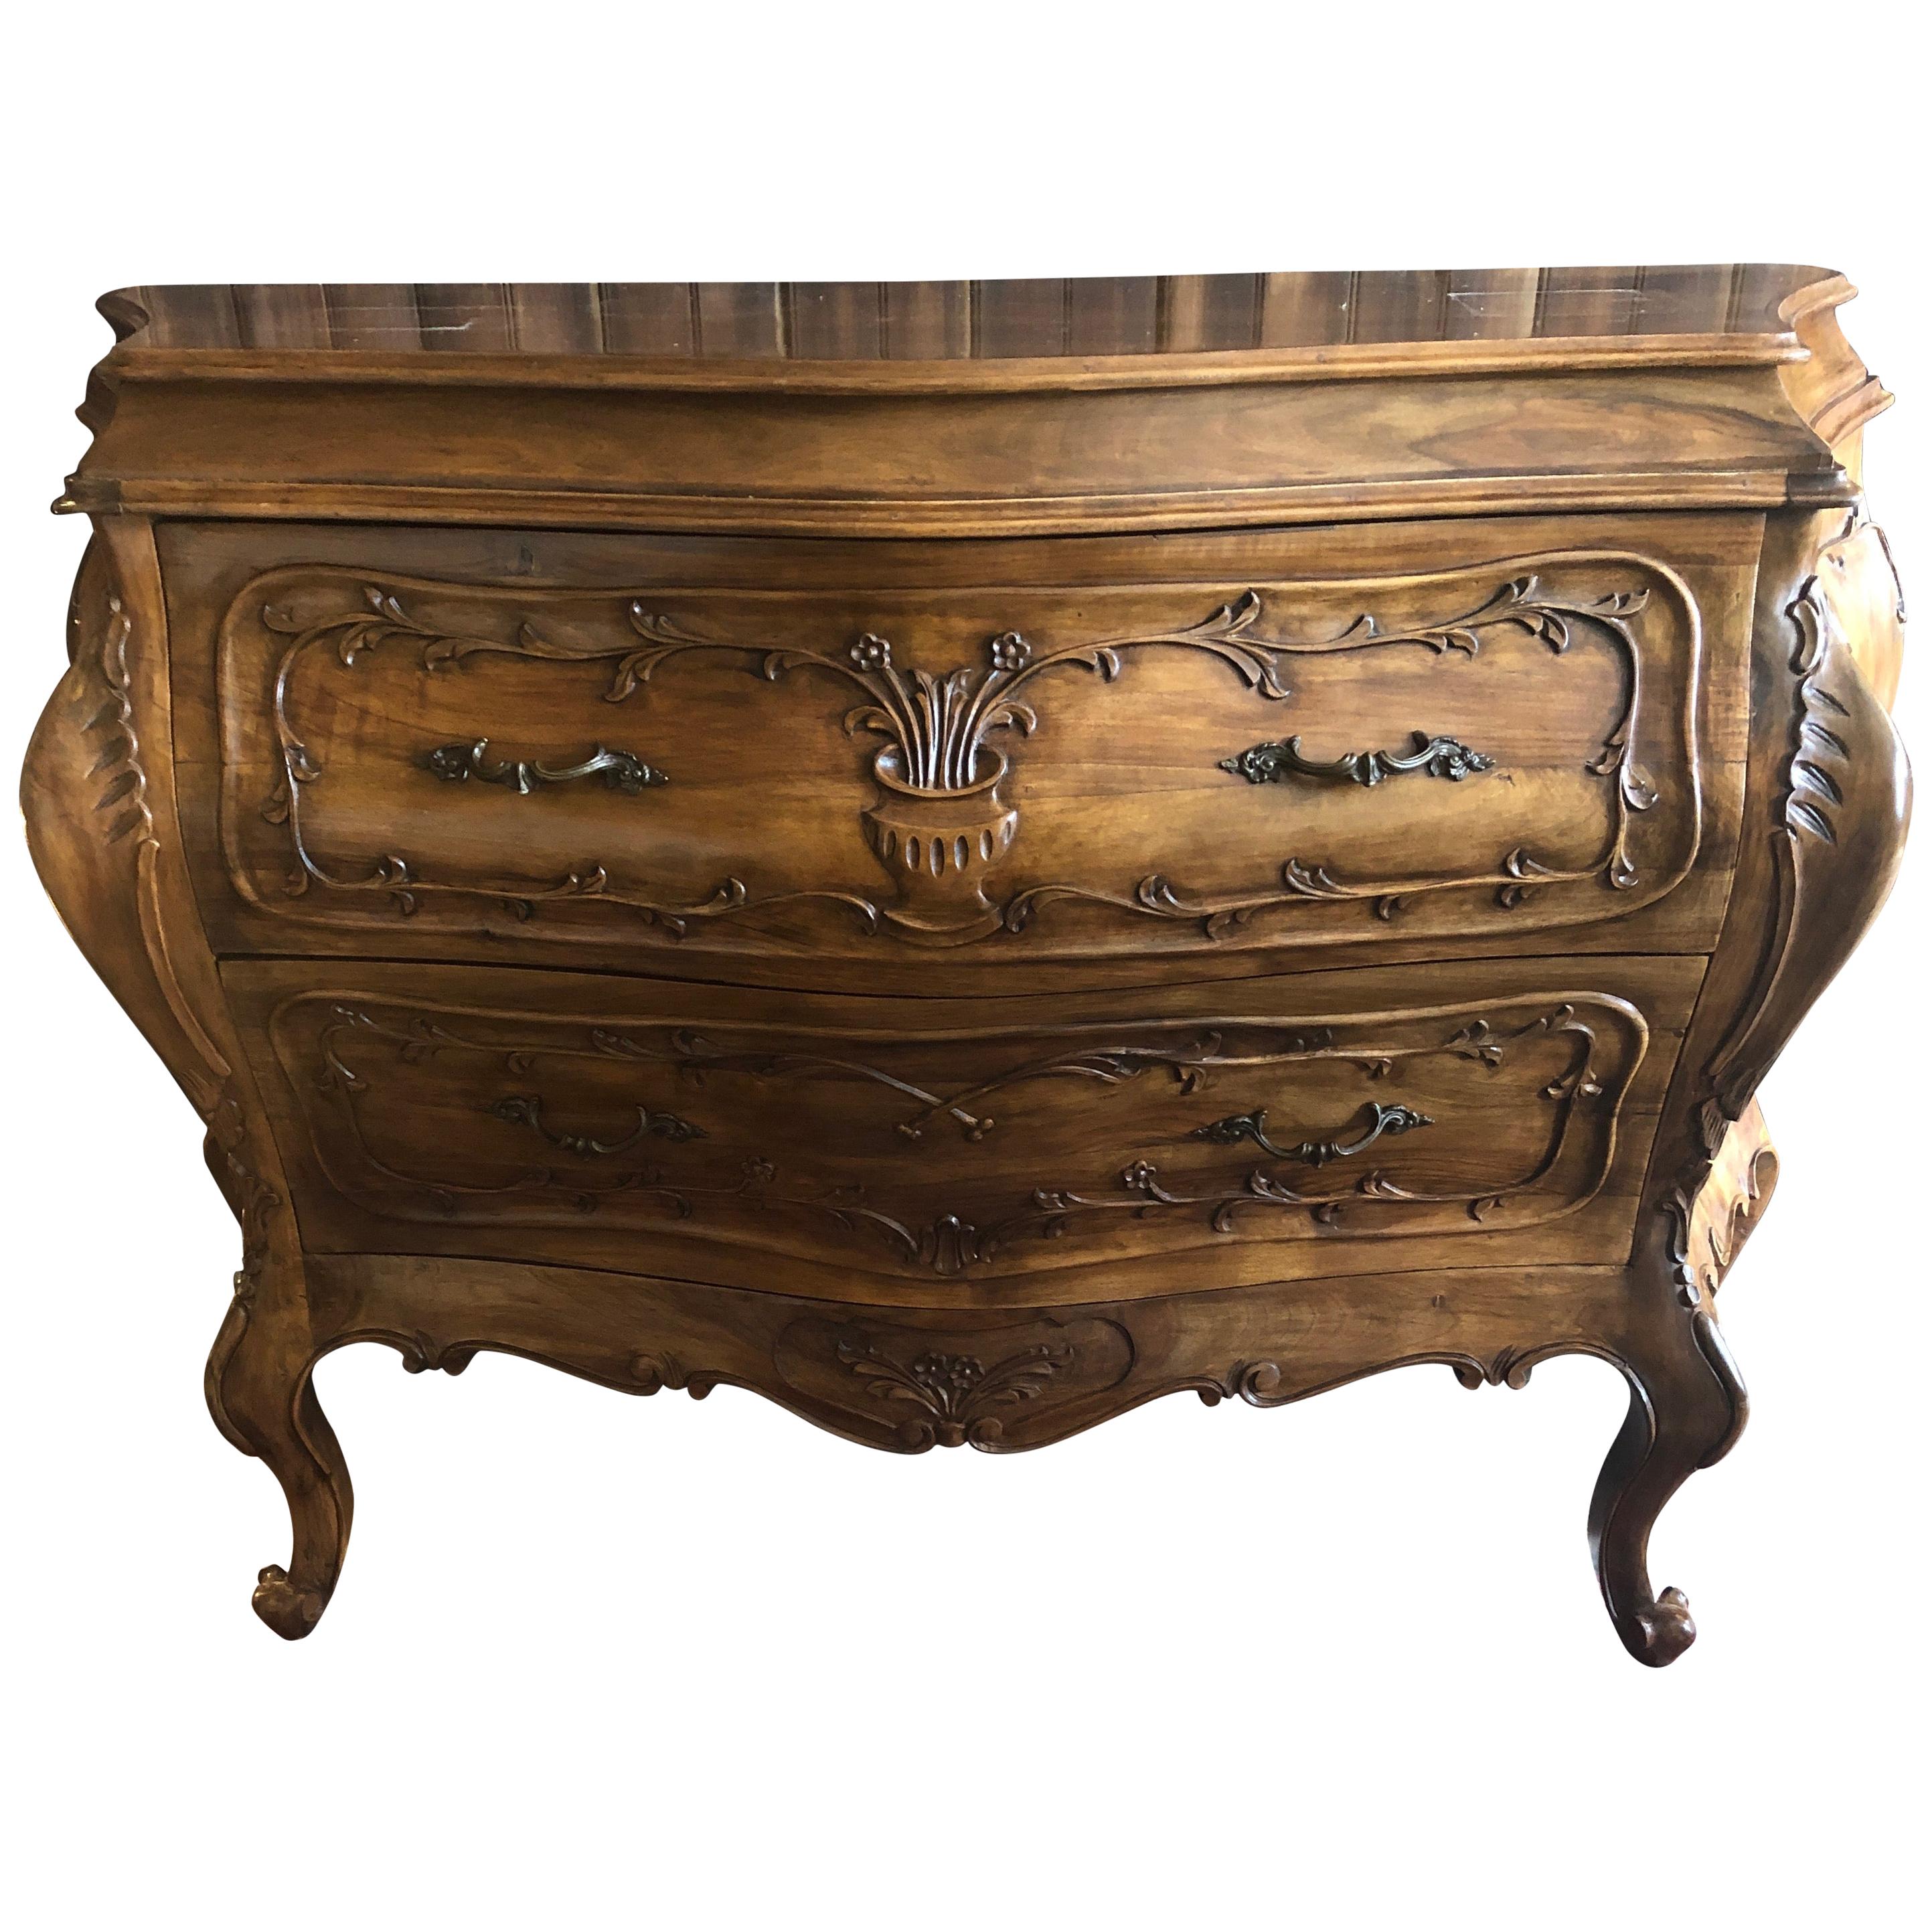 Elegant Florentine Bombay Style Carved Wood Commode Chest of Drawers